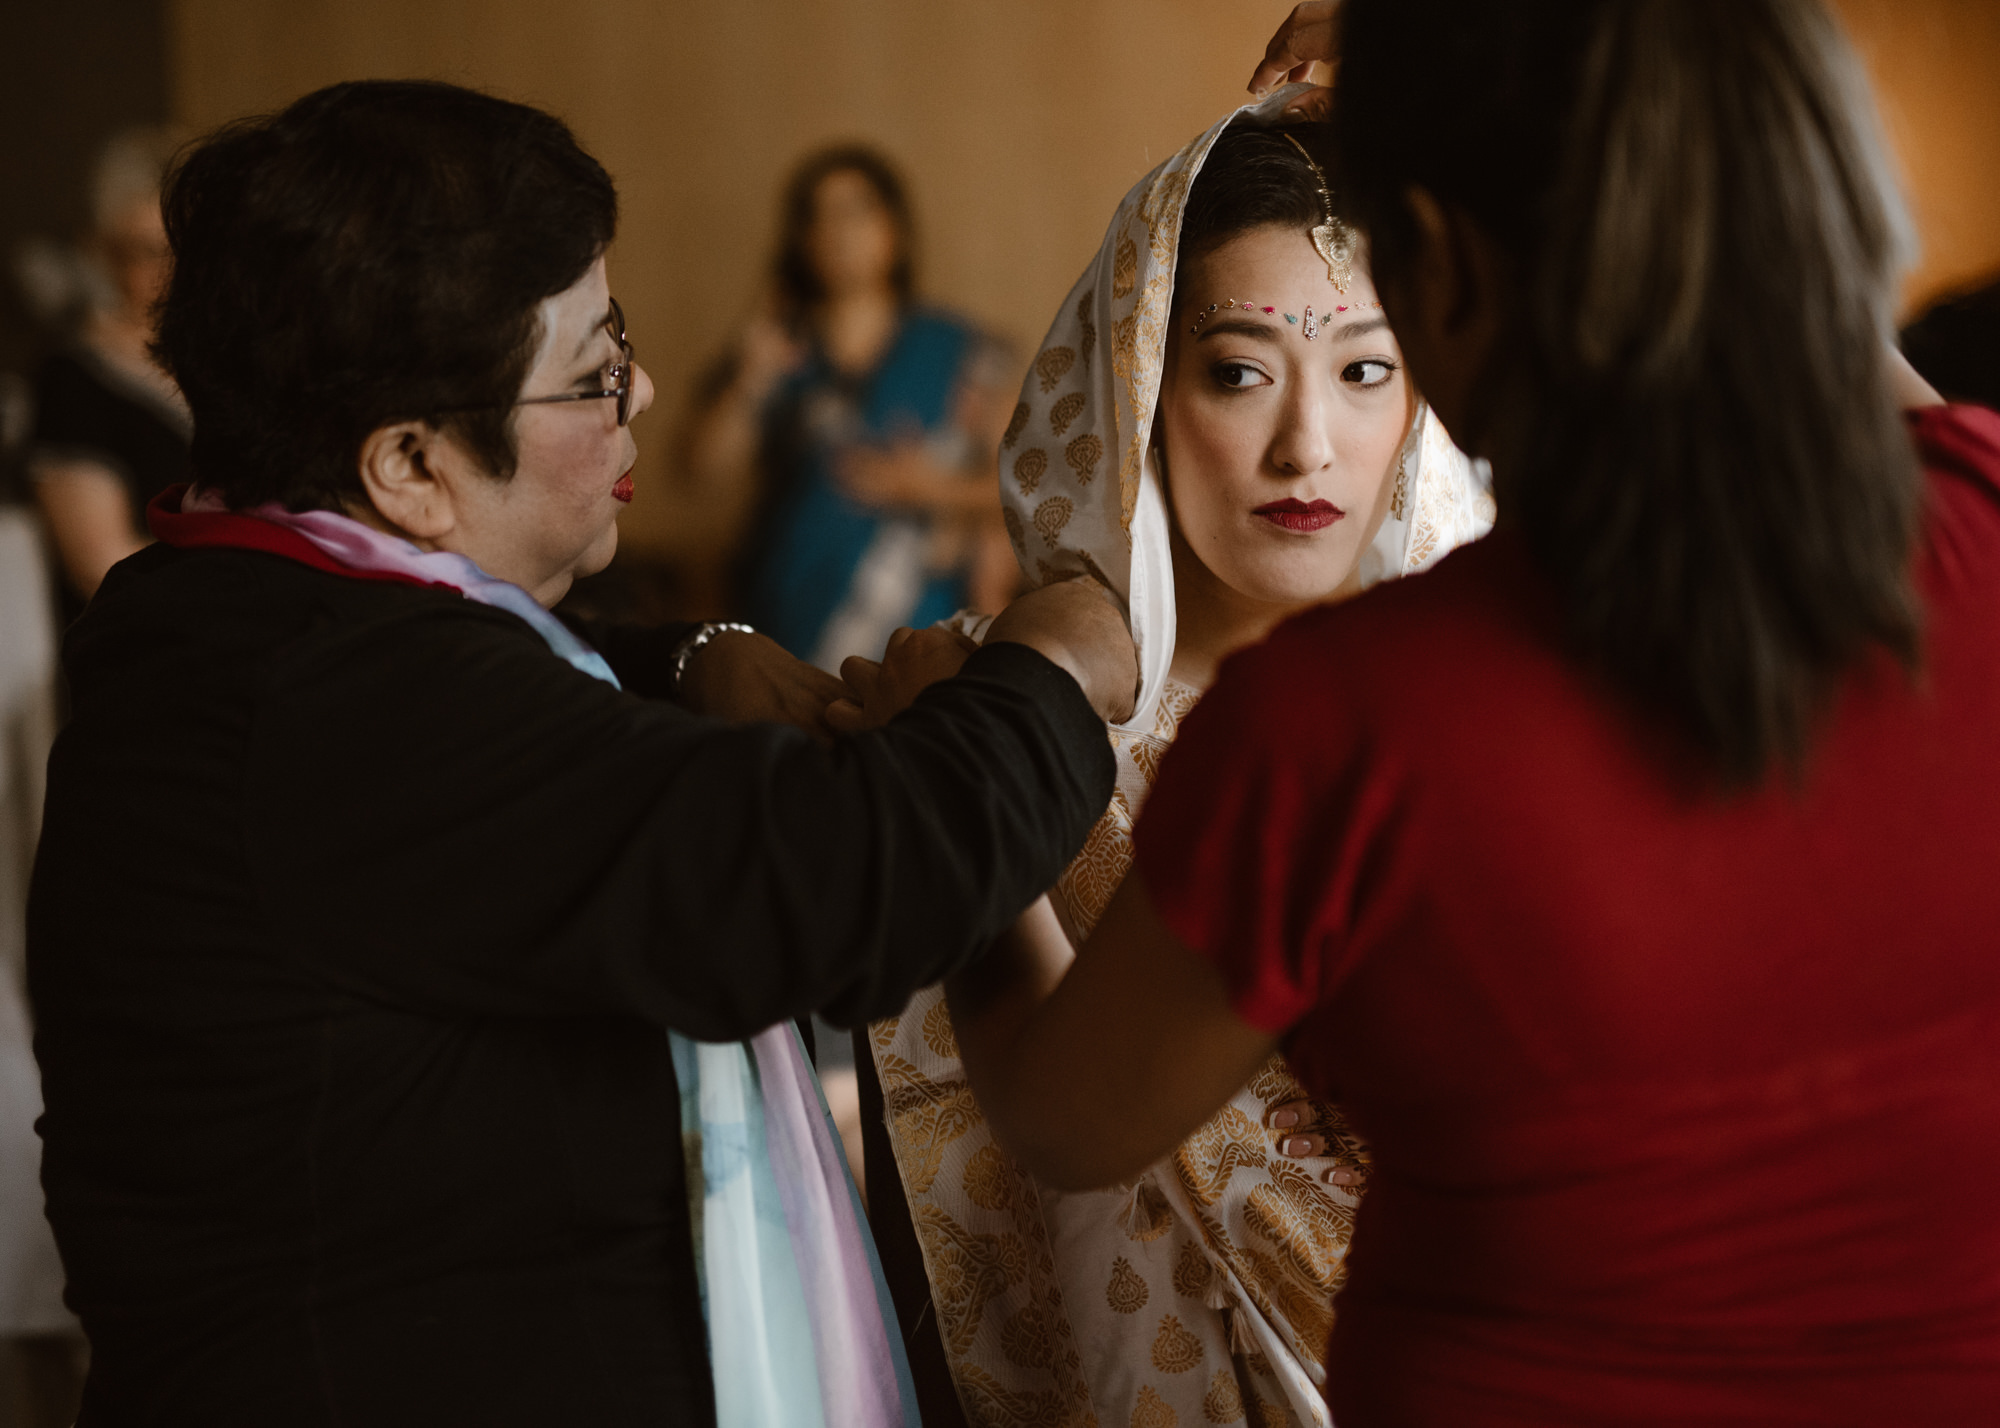 Julie getting her saree tied for her wedding at the Four Seasons Hotel, Seattle.